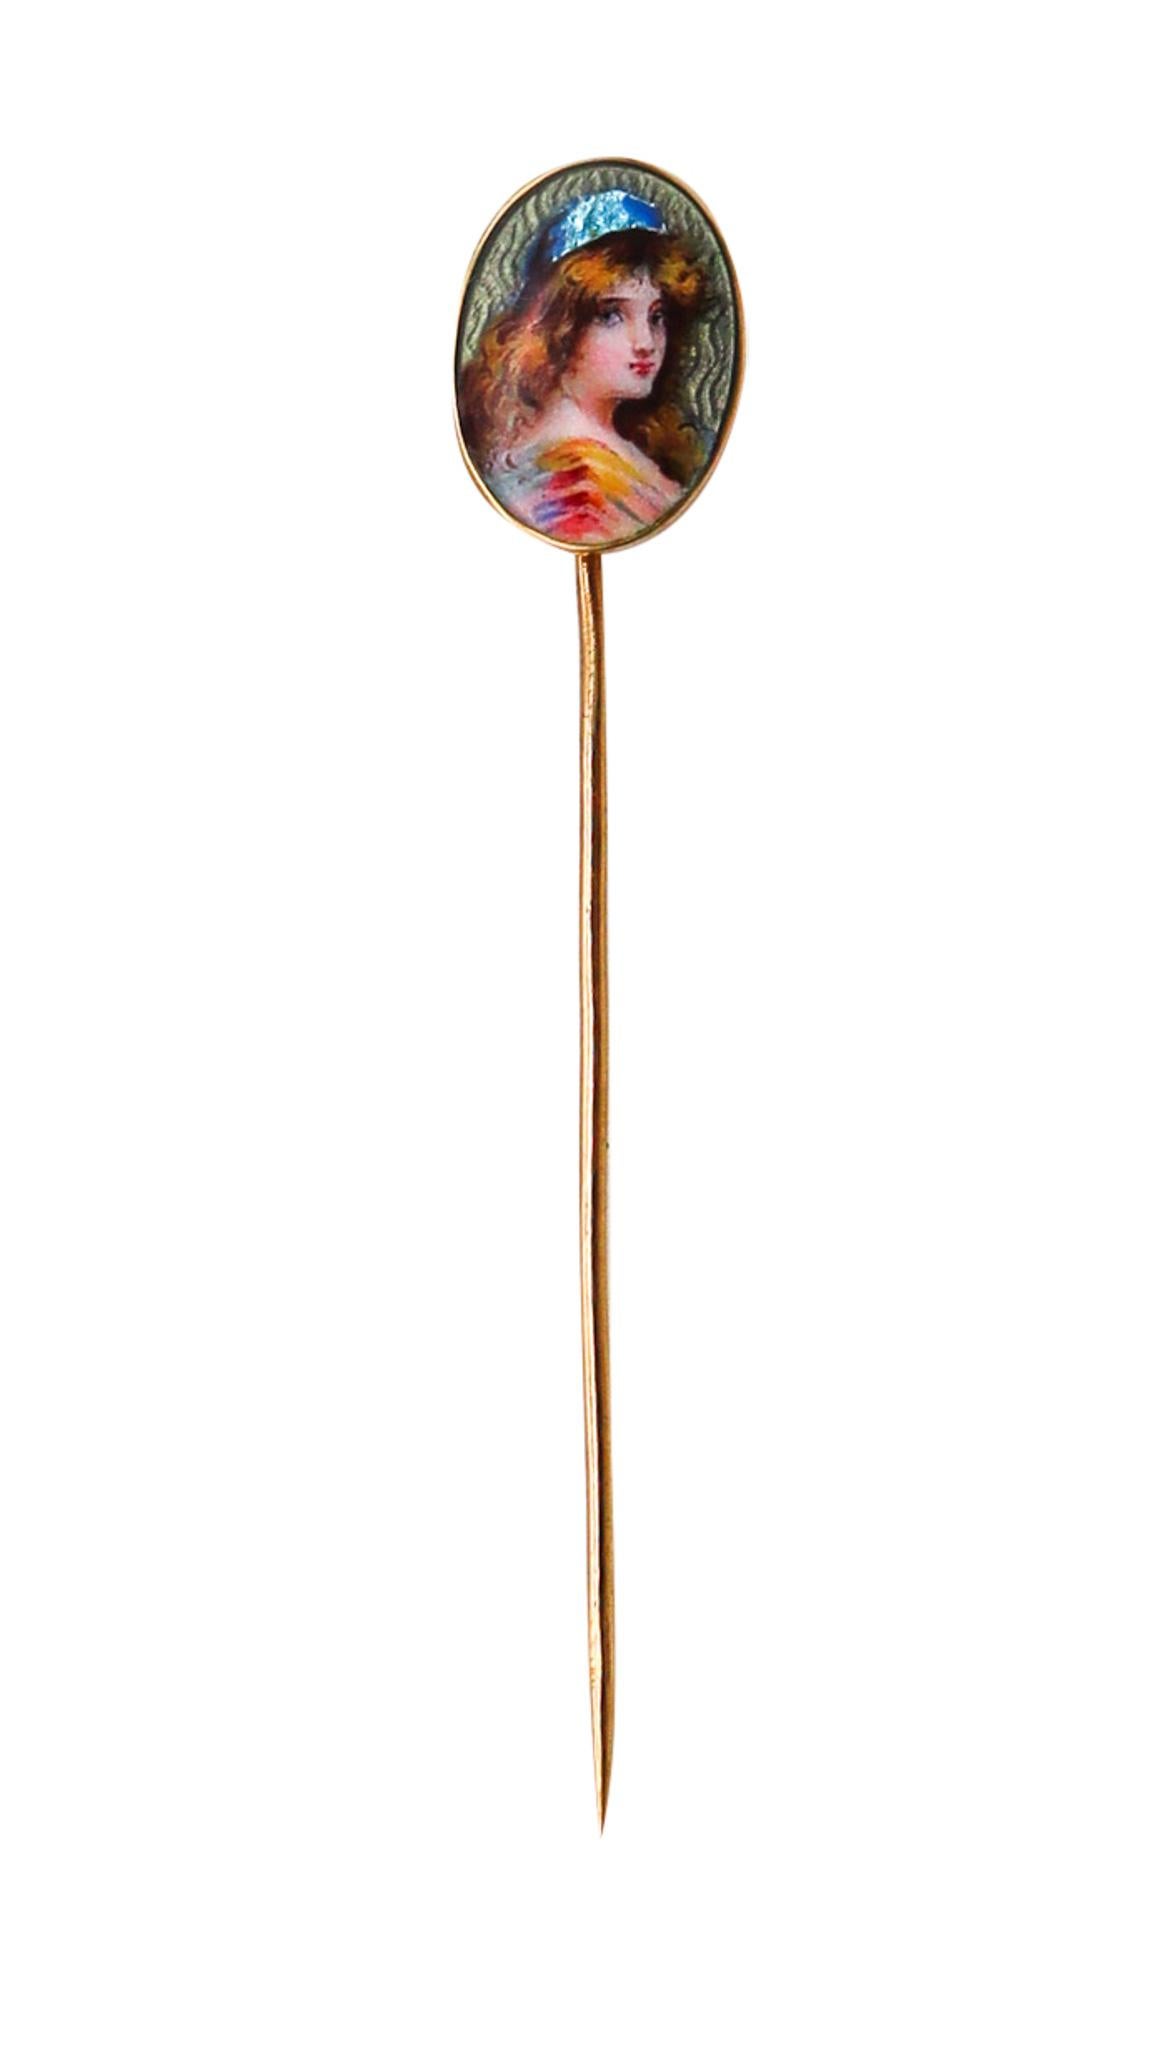 Meyle & Mayer 1900 Art Nouveau Guilloche Enamel Stick Pin In 18Kt Yellow Gold In Excellent Condition For Sale In Miami, FL